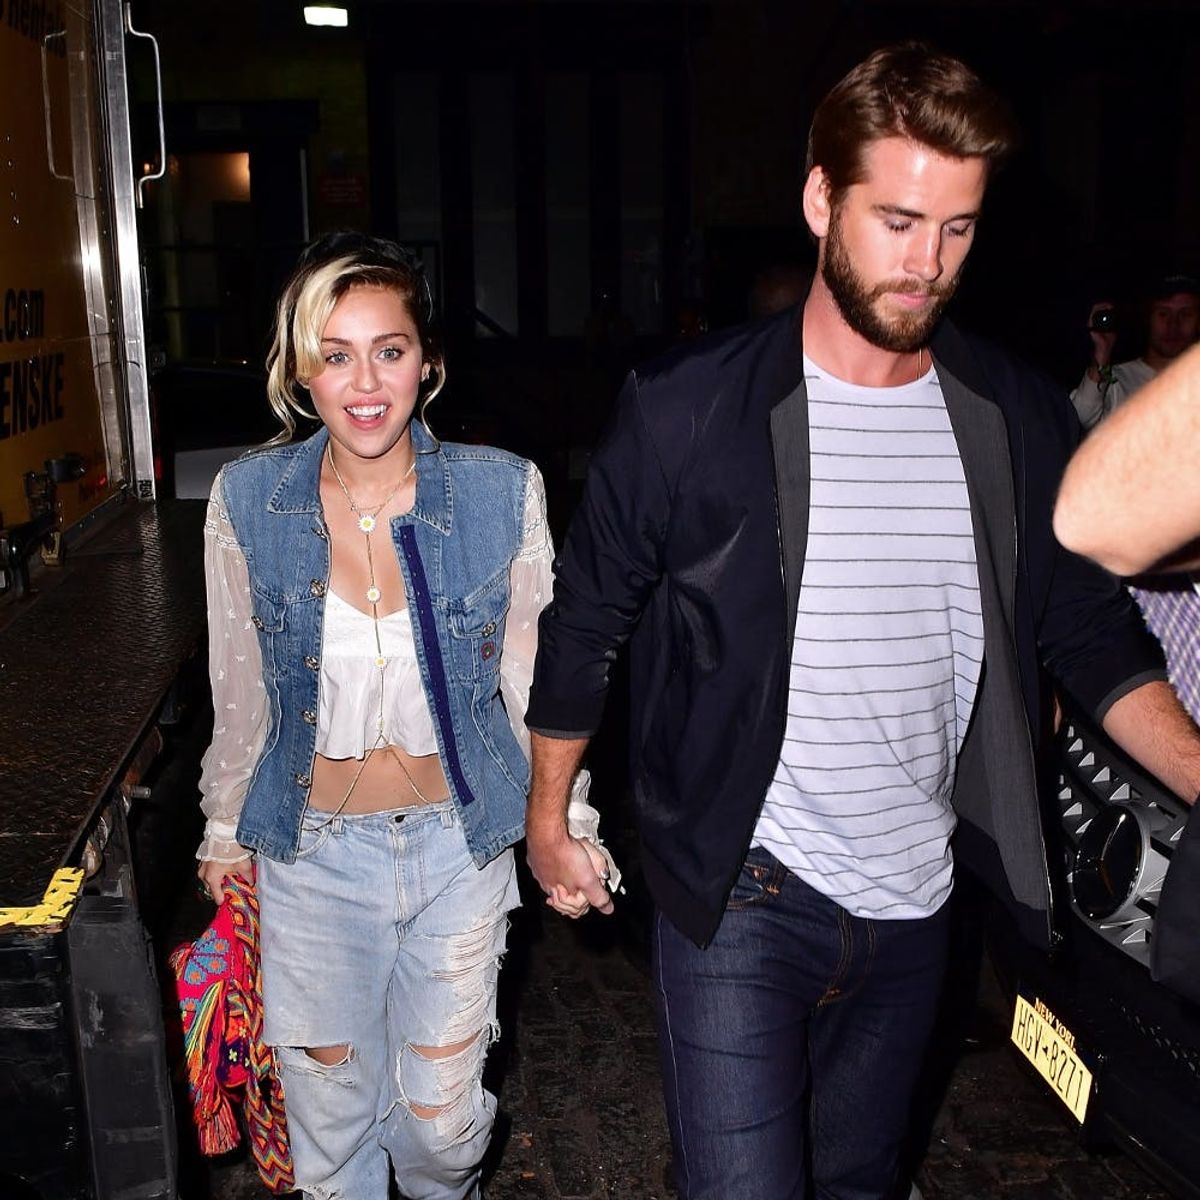 Liam Hemsworth Joins Miley Cyrus’ Family for an Adorable Holiday Pic